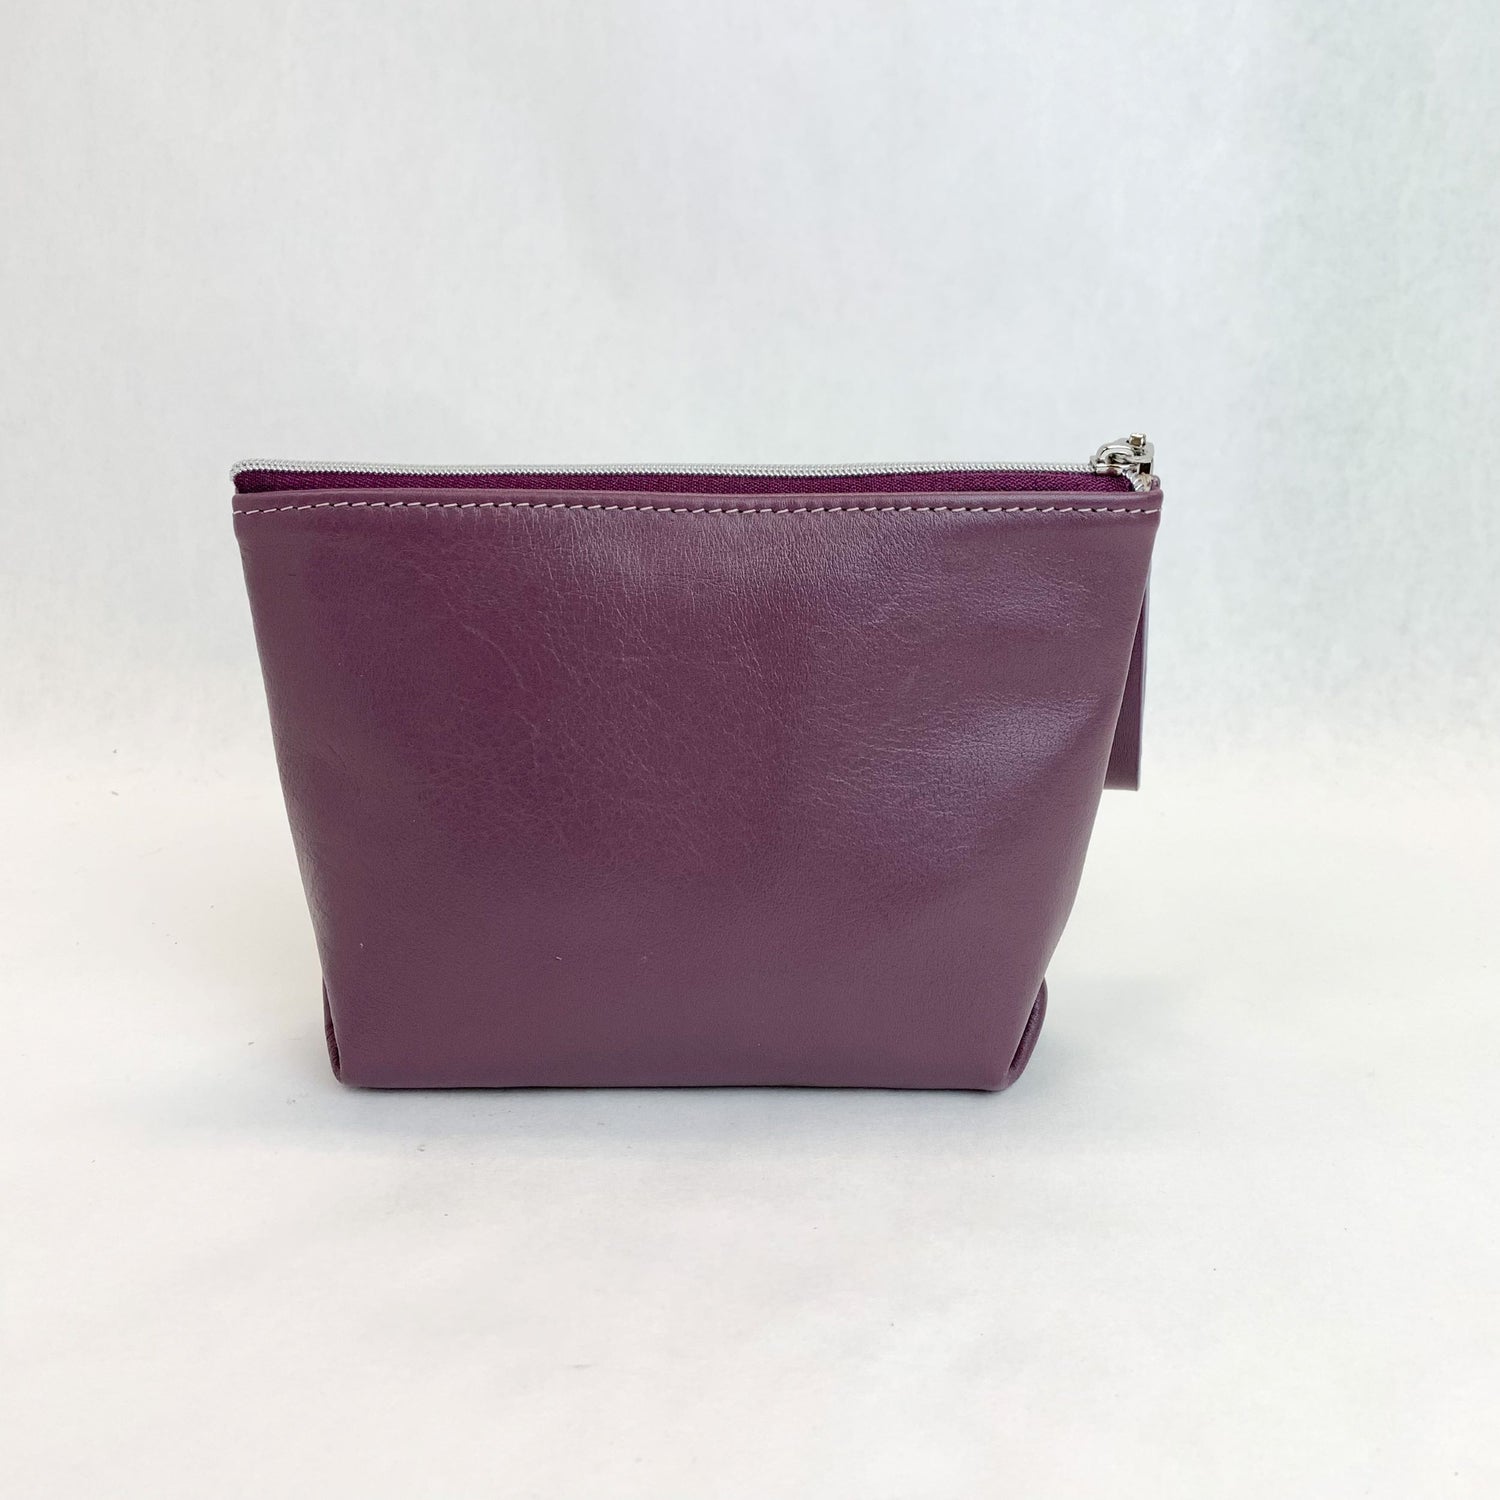 Back view T5 Cosmetics case toiletry bag designer handcrafted in smooth calf leather in lavender purple.